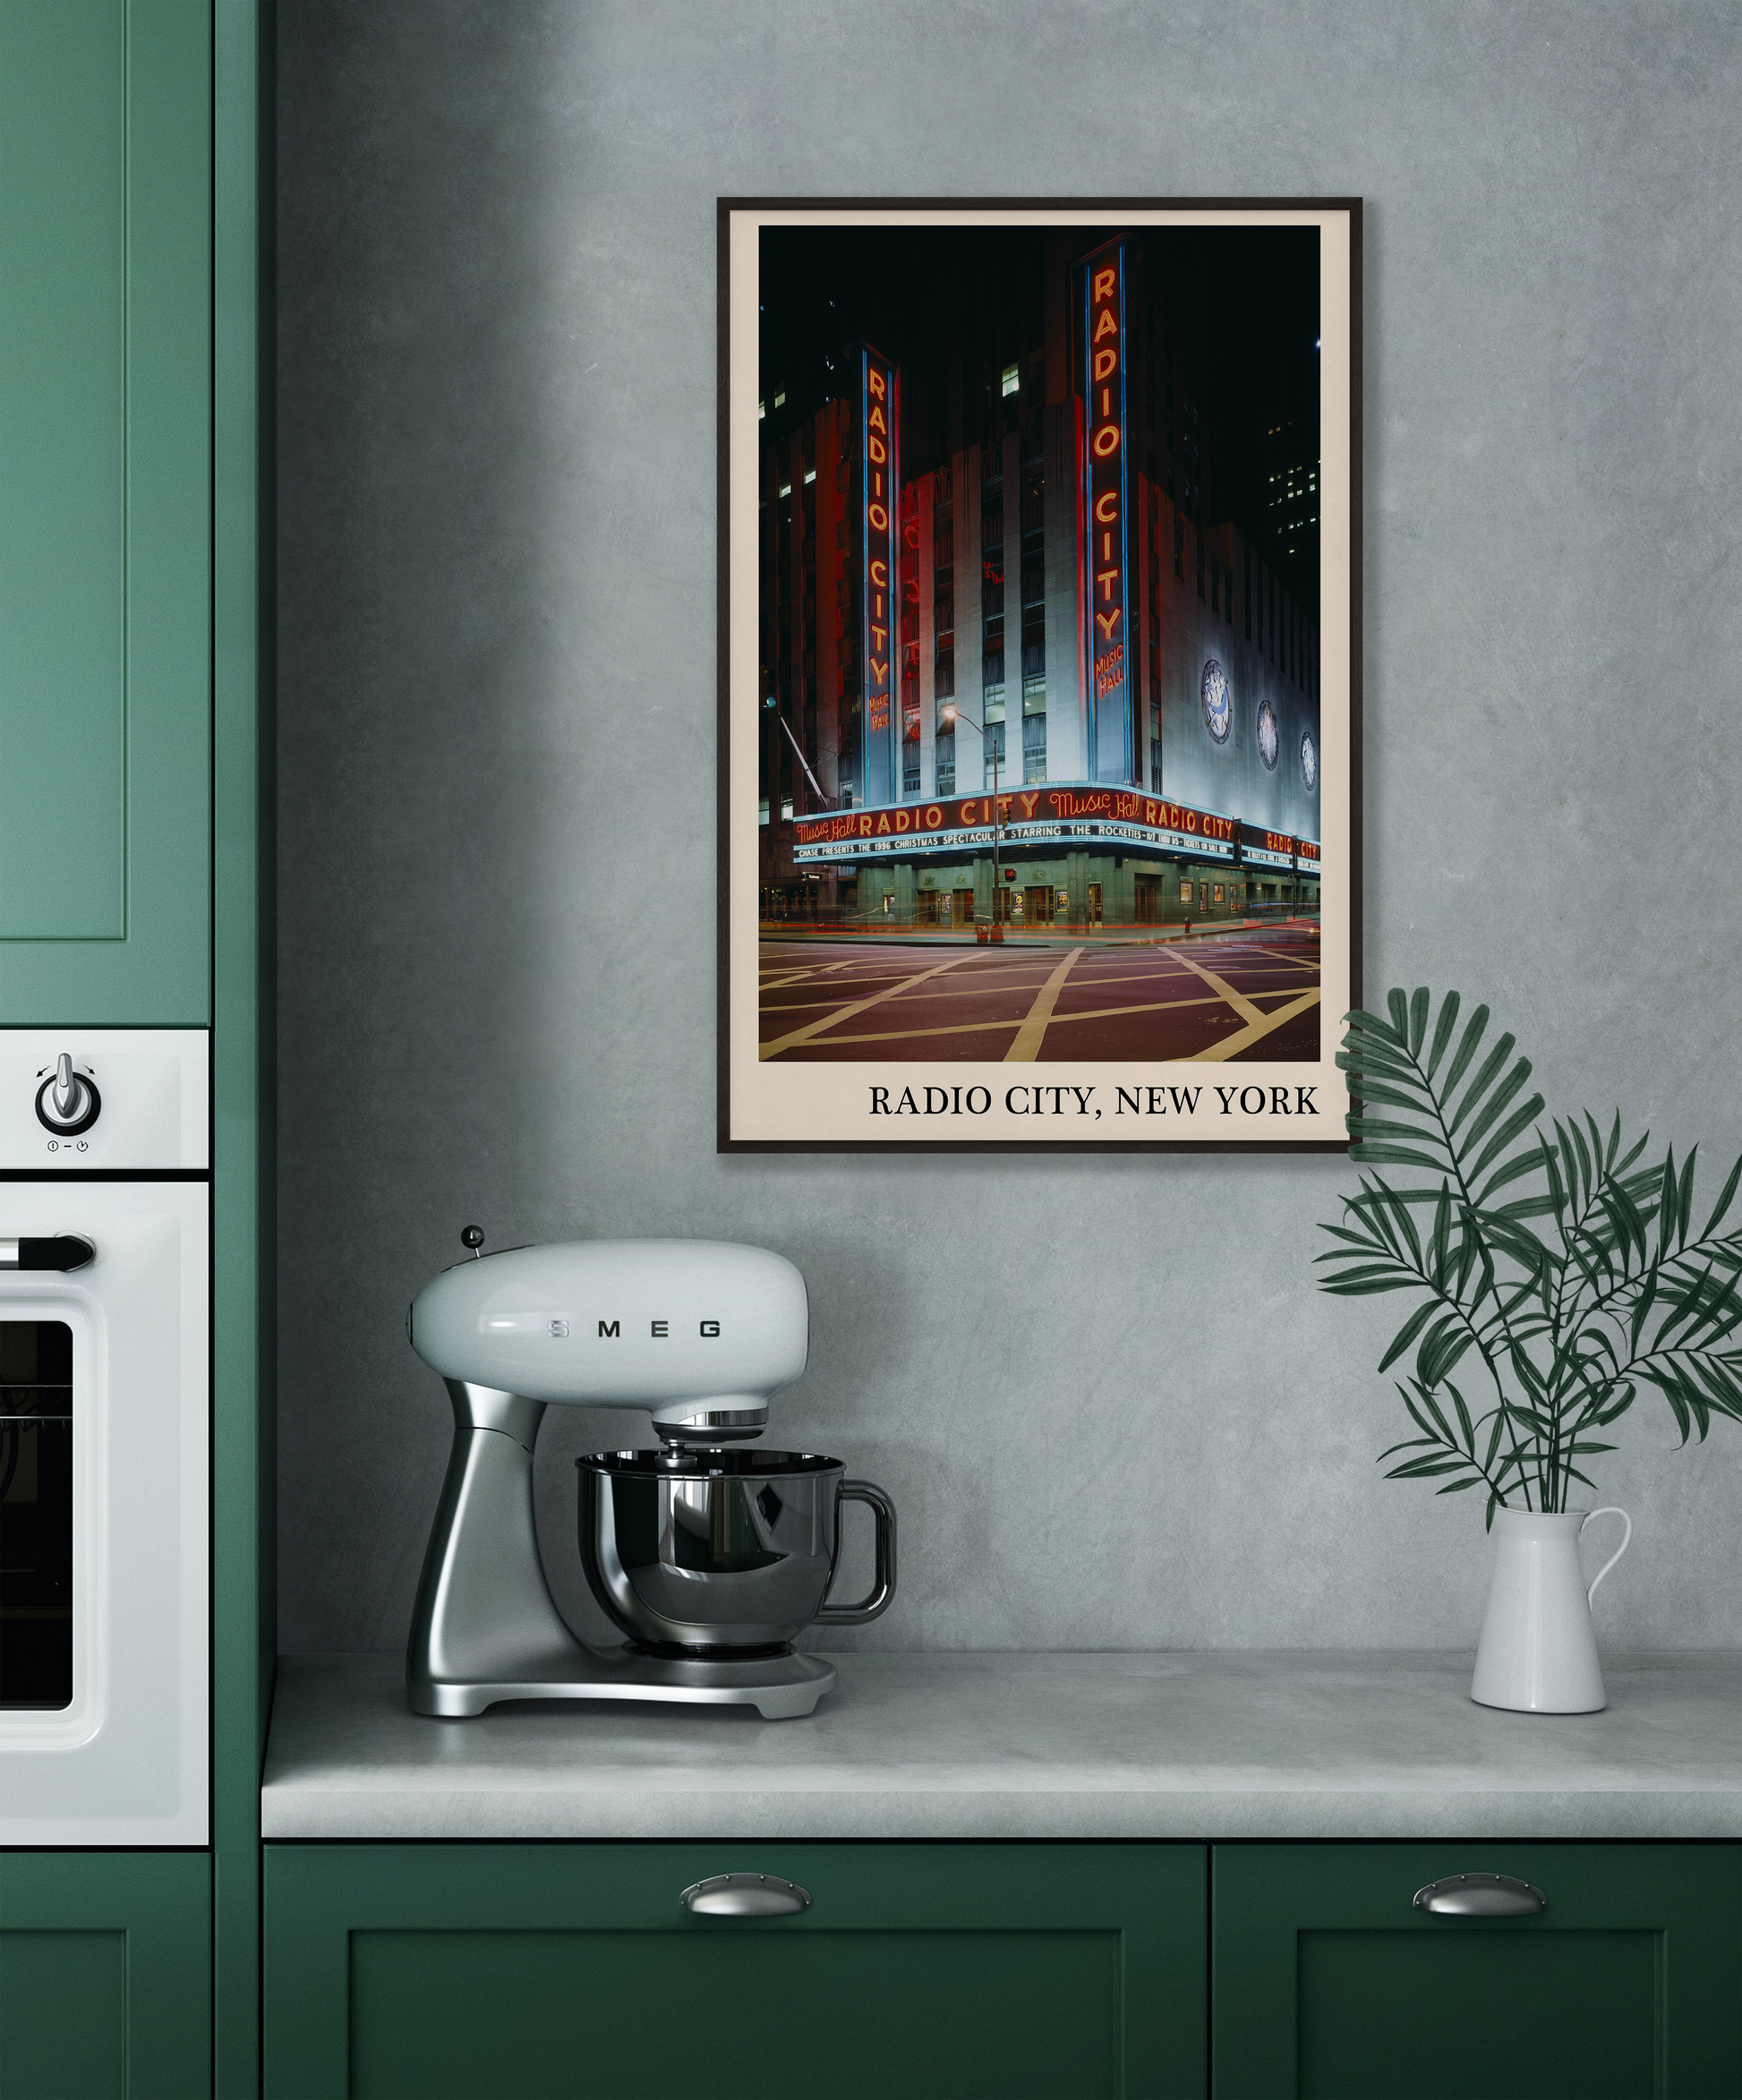 Iconic photo of Radio City in New York captured in a retro black framed jazz venue print, hanging on a grey kitchen wall